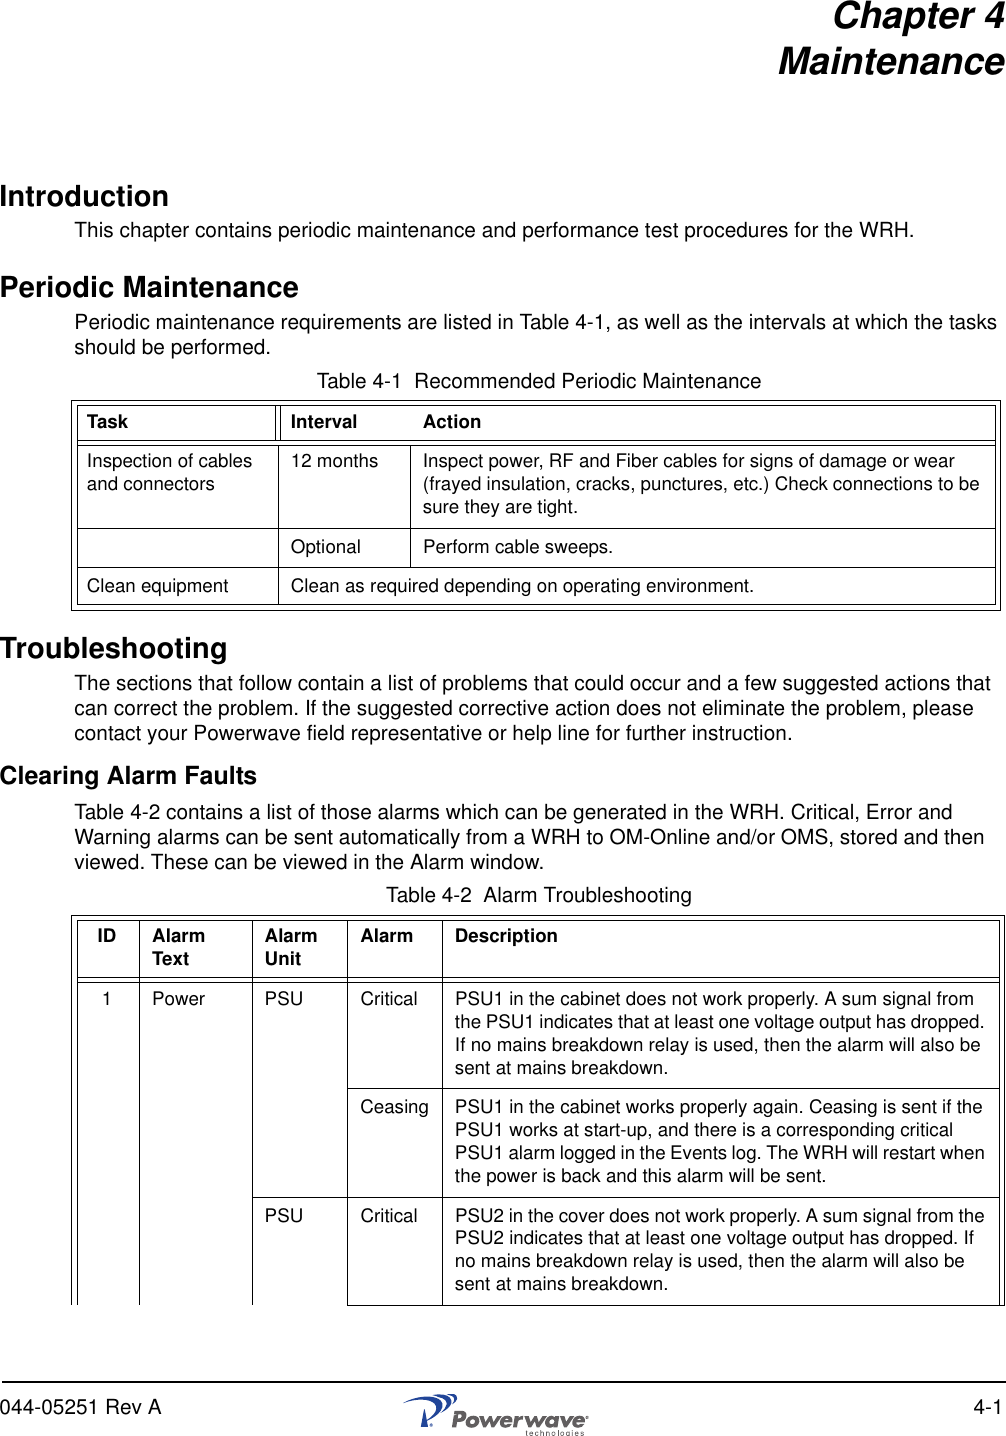 044-05251 Rev A 4-1Chapter 4MaintenanceIntroductionThis chapter contains periodic maintenance and performance test procedures for the WRH.Periodic MaintenancePeriodic maintenance requirements are listed in Table 4-1, as well as the intervals at which the tasks should be performed.Table 4-1  Recommended Periodic MaintenanceTroubleshootingThe sections that follow contain a list of problems that could occur and a few suggested actions that can correct the problem. If the suggested corrective action does not eliminate the problem, please contact your Powerwave field representative or help line for further instruction.Clearing Alarm FaultsTable 4-2 contains a list of those alarms which can be generated in the WRH. Critical, Error and Warning alarms can be sent automatically from a WRH to OM-Online and/or OMS, stored and then viewed. These can be viewed in the Alarm window.Table 4-2  Alarm TroubleshootingTask Interval ActionInspection of cables and connectors 12 months Inspect power, RF and Fiber cables for signs of damage or wear (frayed insulation, cracks, punctures, etc.) Check connections to be sure they are tight.Optional Perform cable sweeps.Clean equipment Clean as required depending on operating environment.ID Alarm Text Alarm Unit Alarm Description1 Power PSU Critical PSU1 in the cabinet does not work properly. A sum signal from the PSU1 indicates that at least one voltage output has dropped. If no mains breakdown relay is used, then the alarm will also be sent at mains breakdown.Ceasing PSU1 in the cabinet works properly again. Ceasing is sent if the PSU1 works at start-up, and there is a corresponding critical PSU1 alarm logged in the Events log. The WRH will restart when the power is back and this alarm will be sent.PSU Critical PSU2 in the cover does not work properly. A sum signal from the PSU2 indicates that at least one voltage output has dropped. If no mains breakdown relay is used, then the alarm will also be sent at mains breakdown.